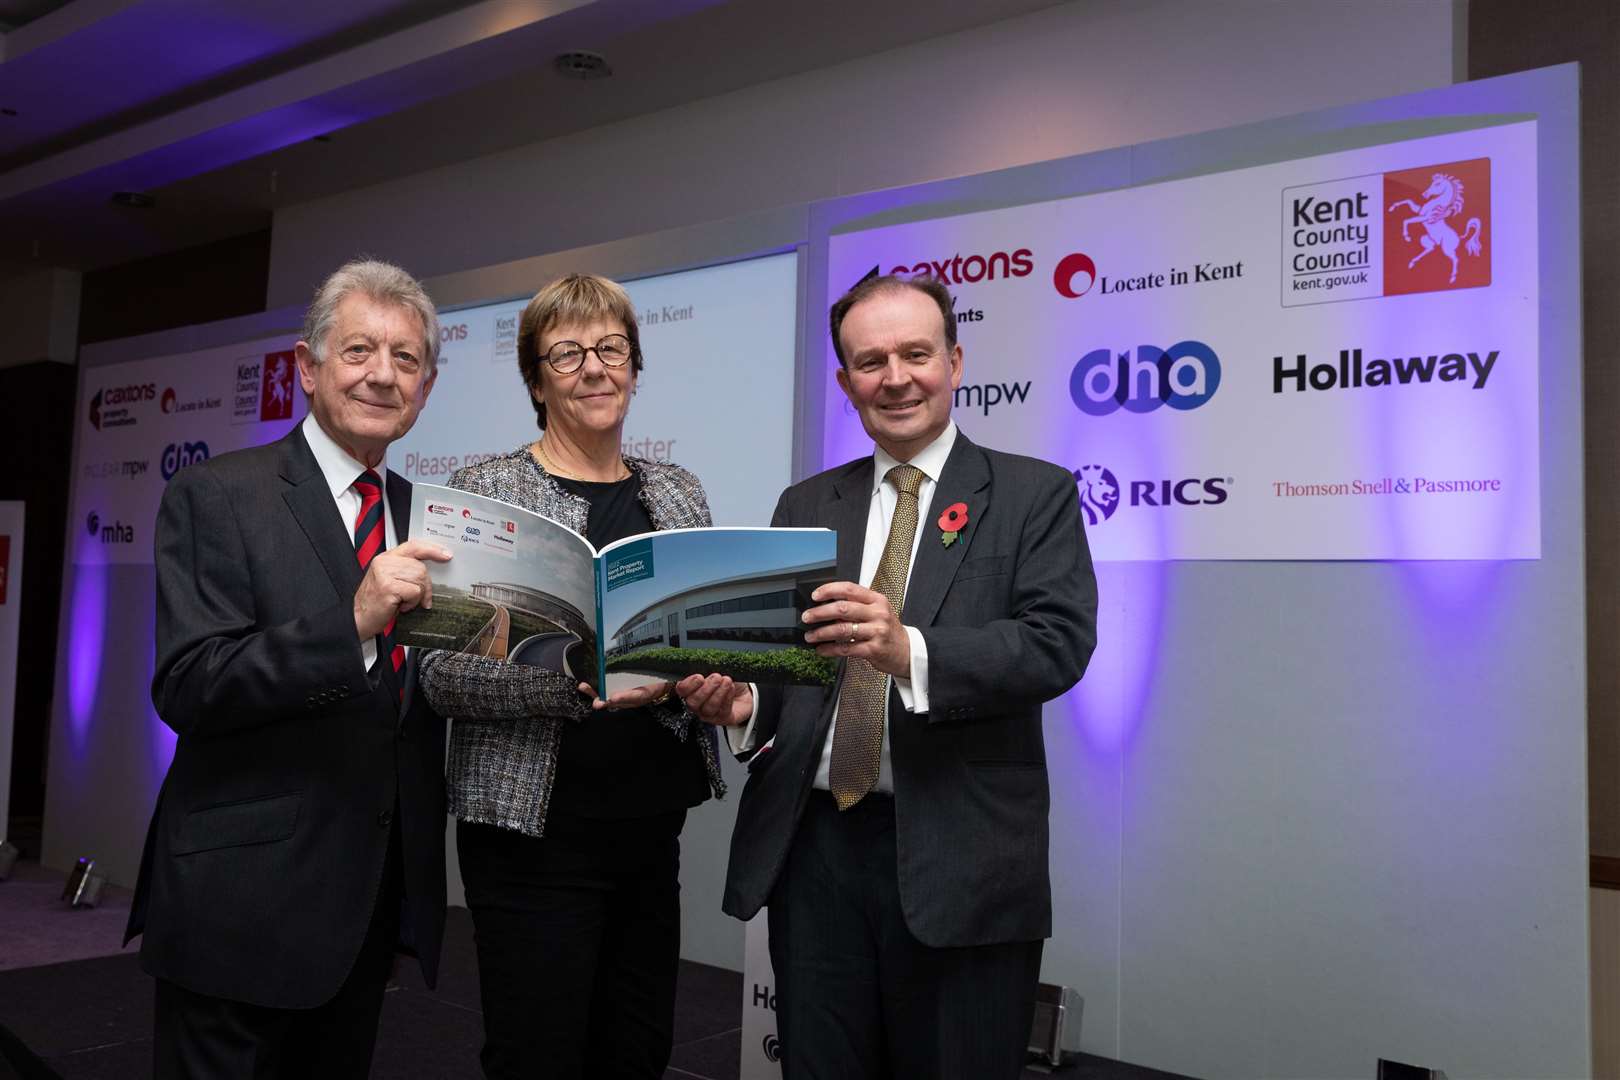 Ron Roser of Caxtons; Susie Warran-Smith from Locate in Kent; and Roger Gough, leader of KCC at the launch of the Kent Property Market Report